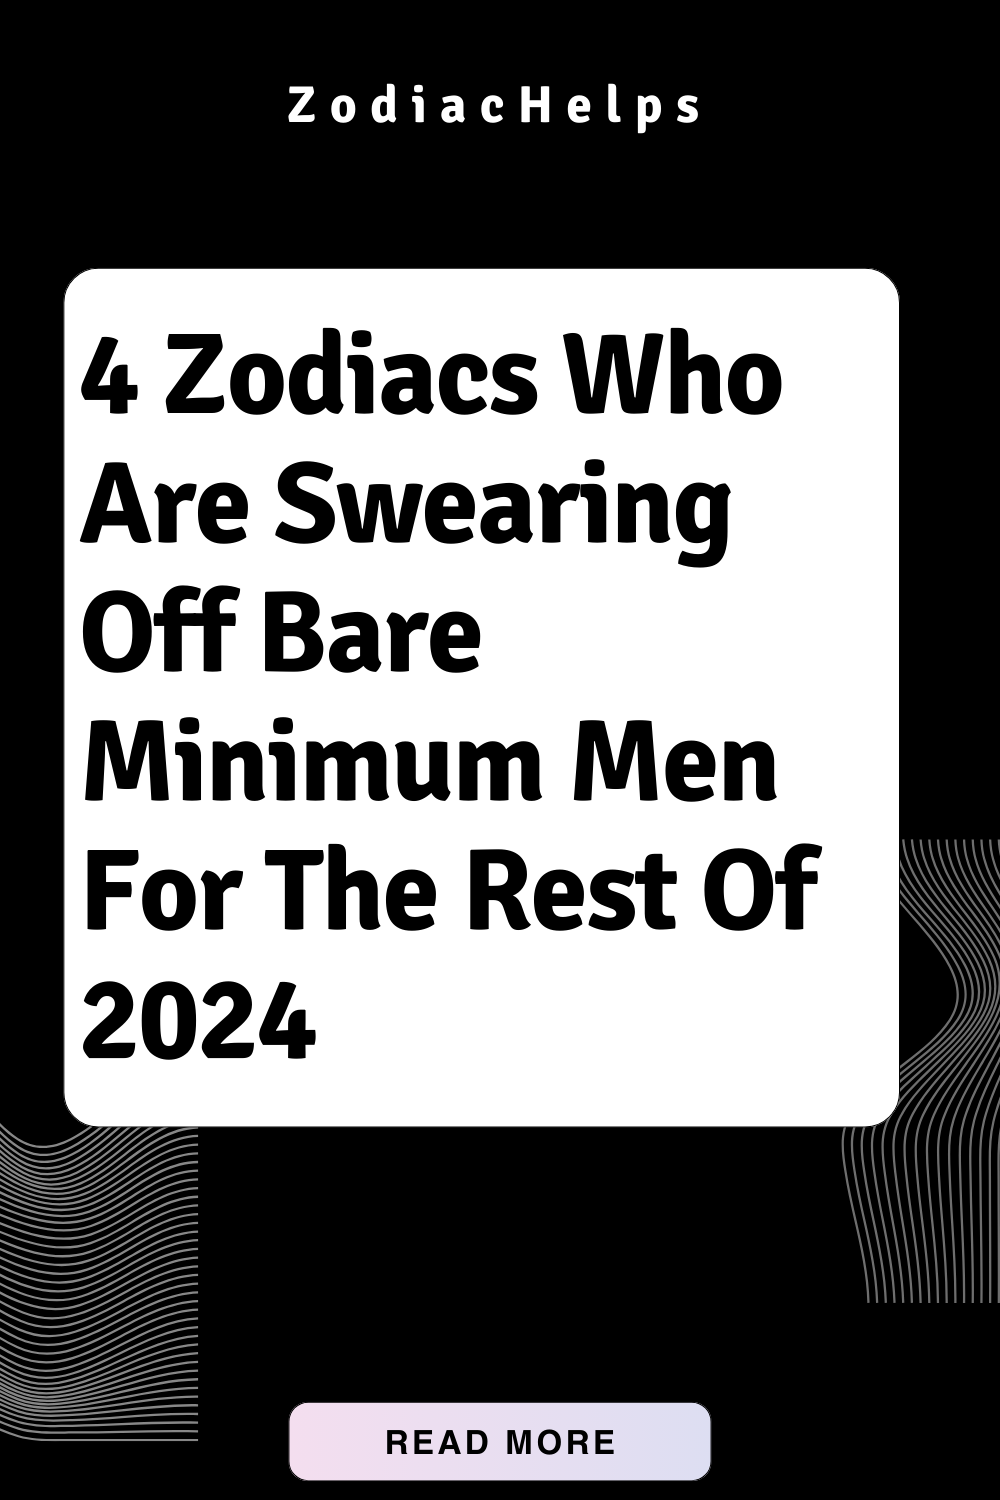 4 Zodiacs Who Are Swearing Off Bare Minimum Men For The Rest Of 2024